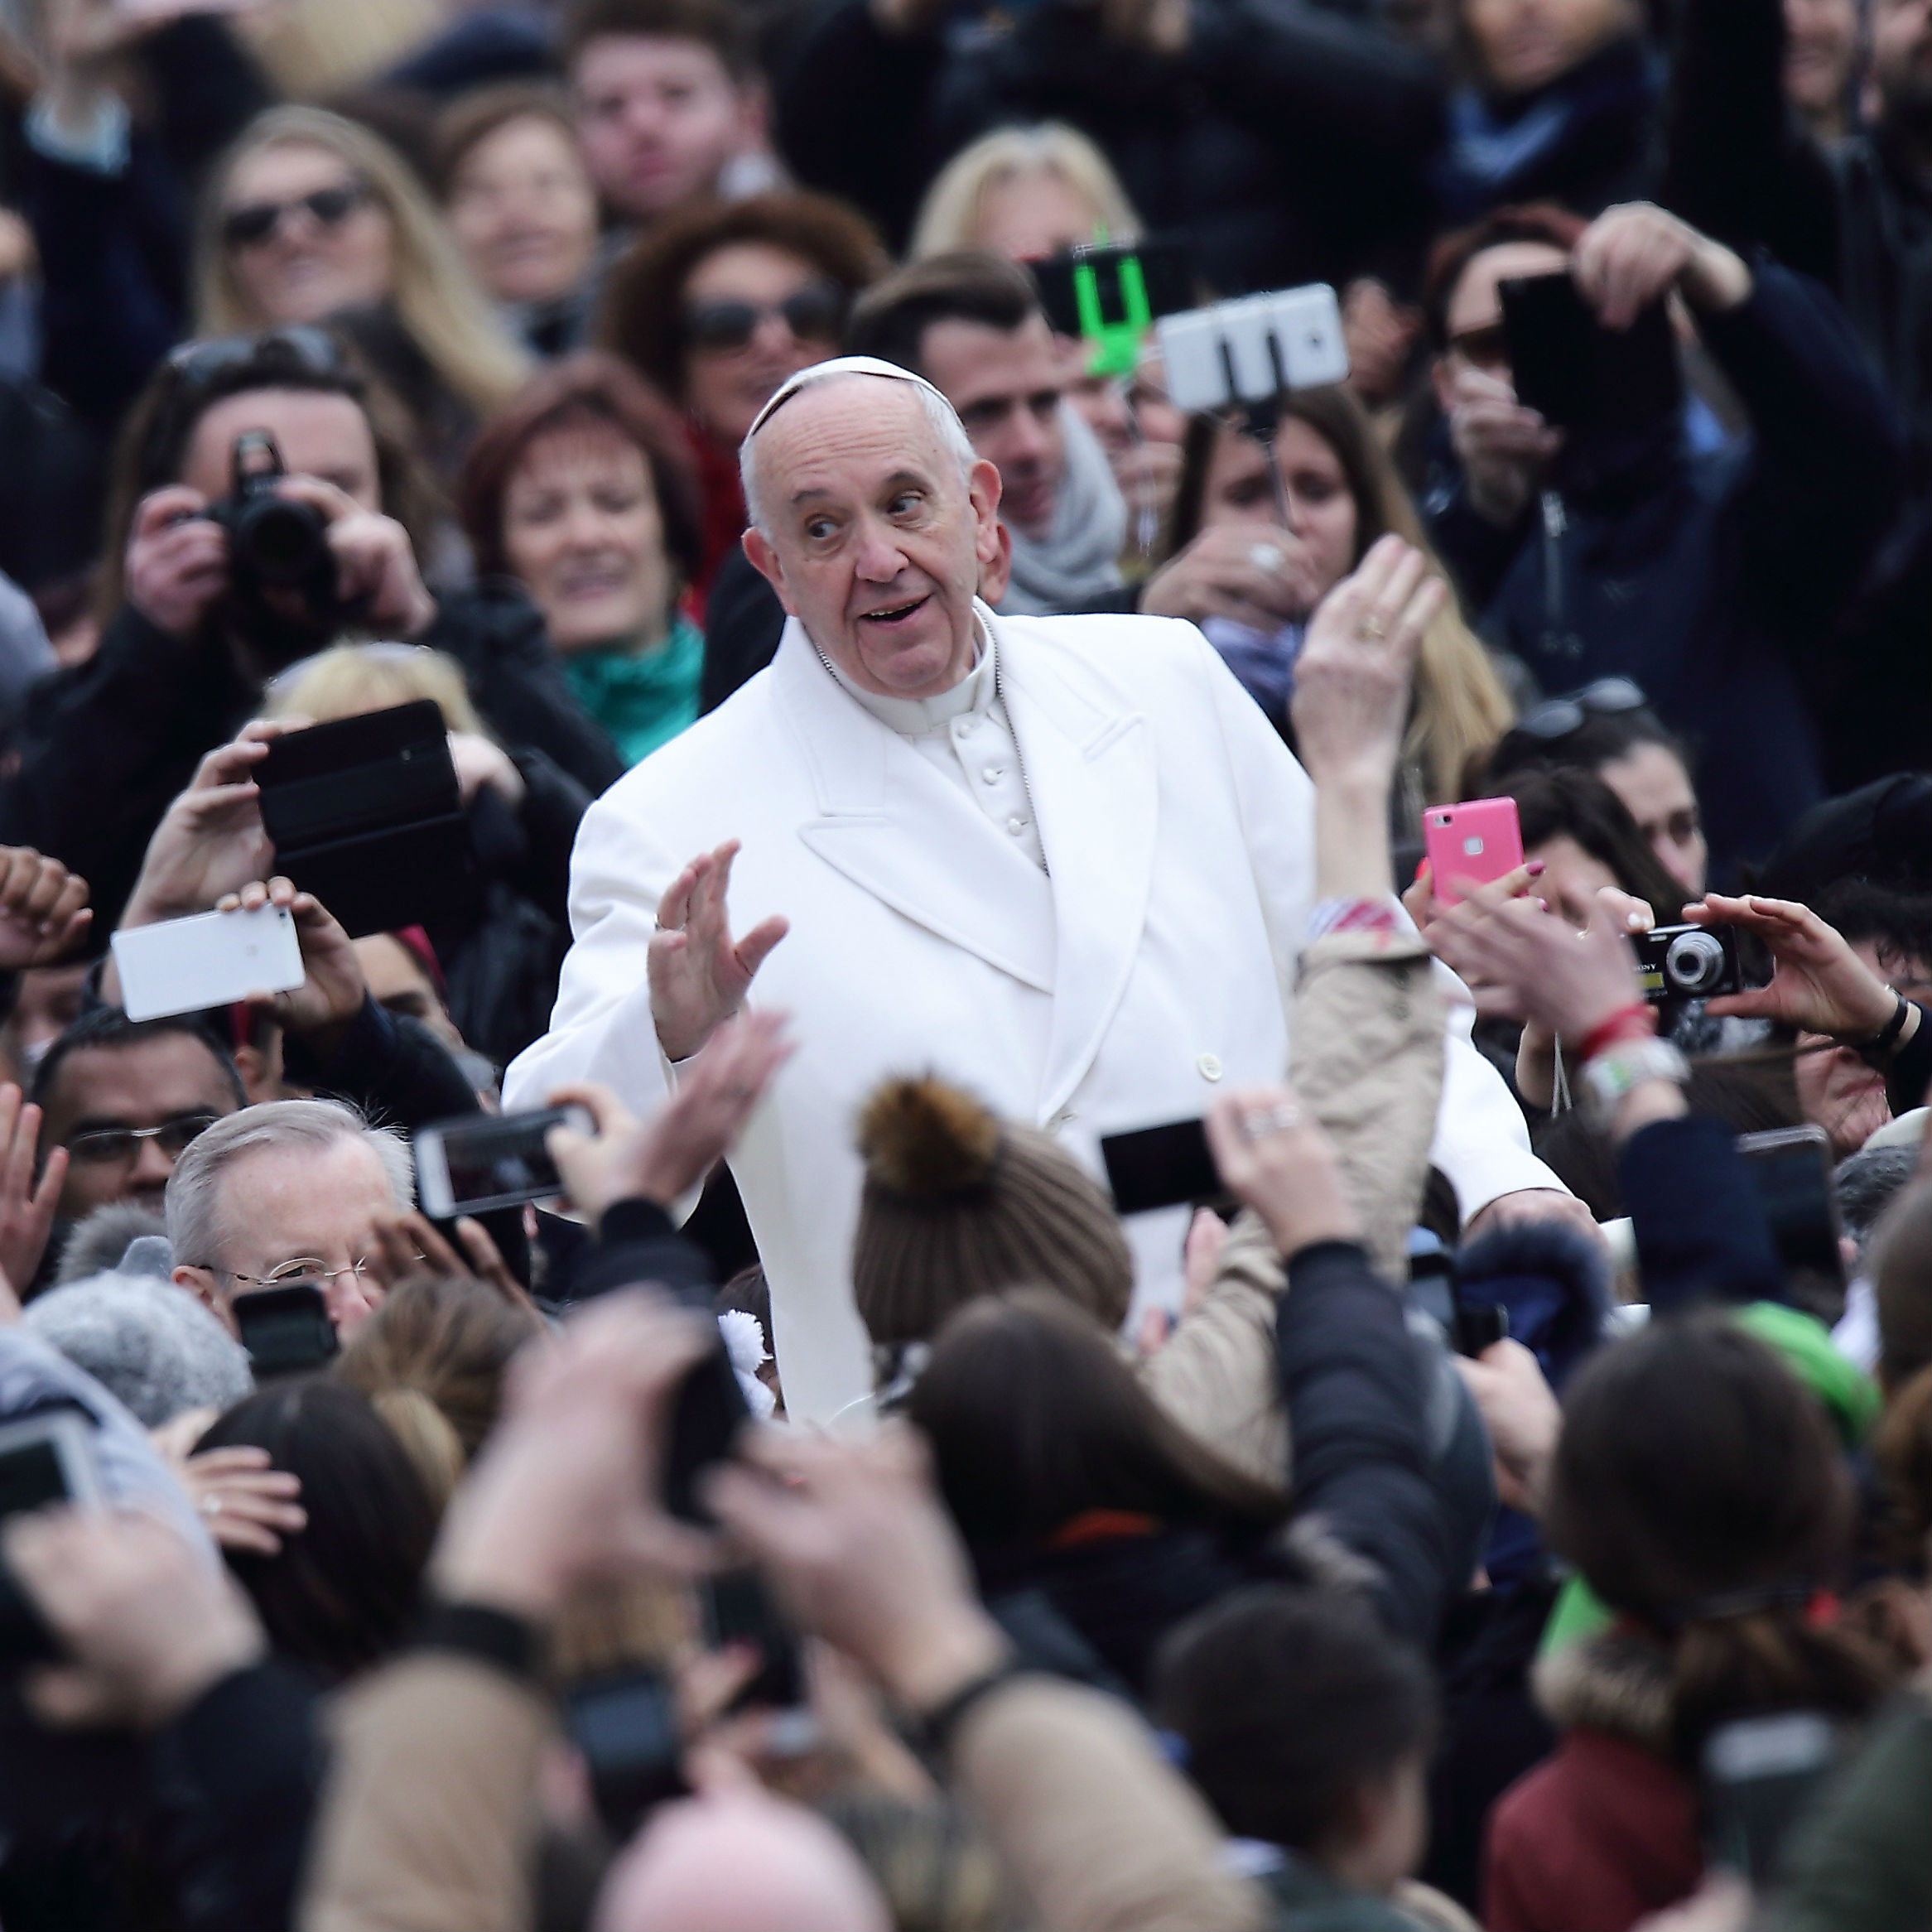 Scandal of Catholics leading double lives gives ammunition to atheists, says pope 